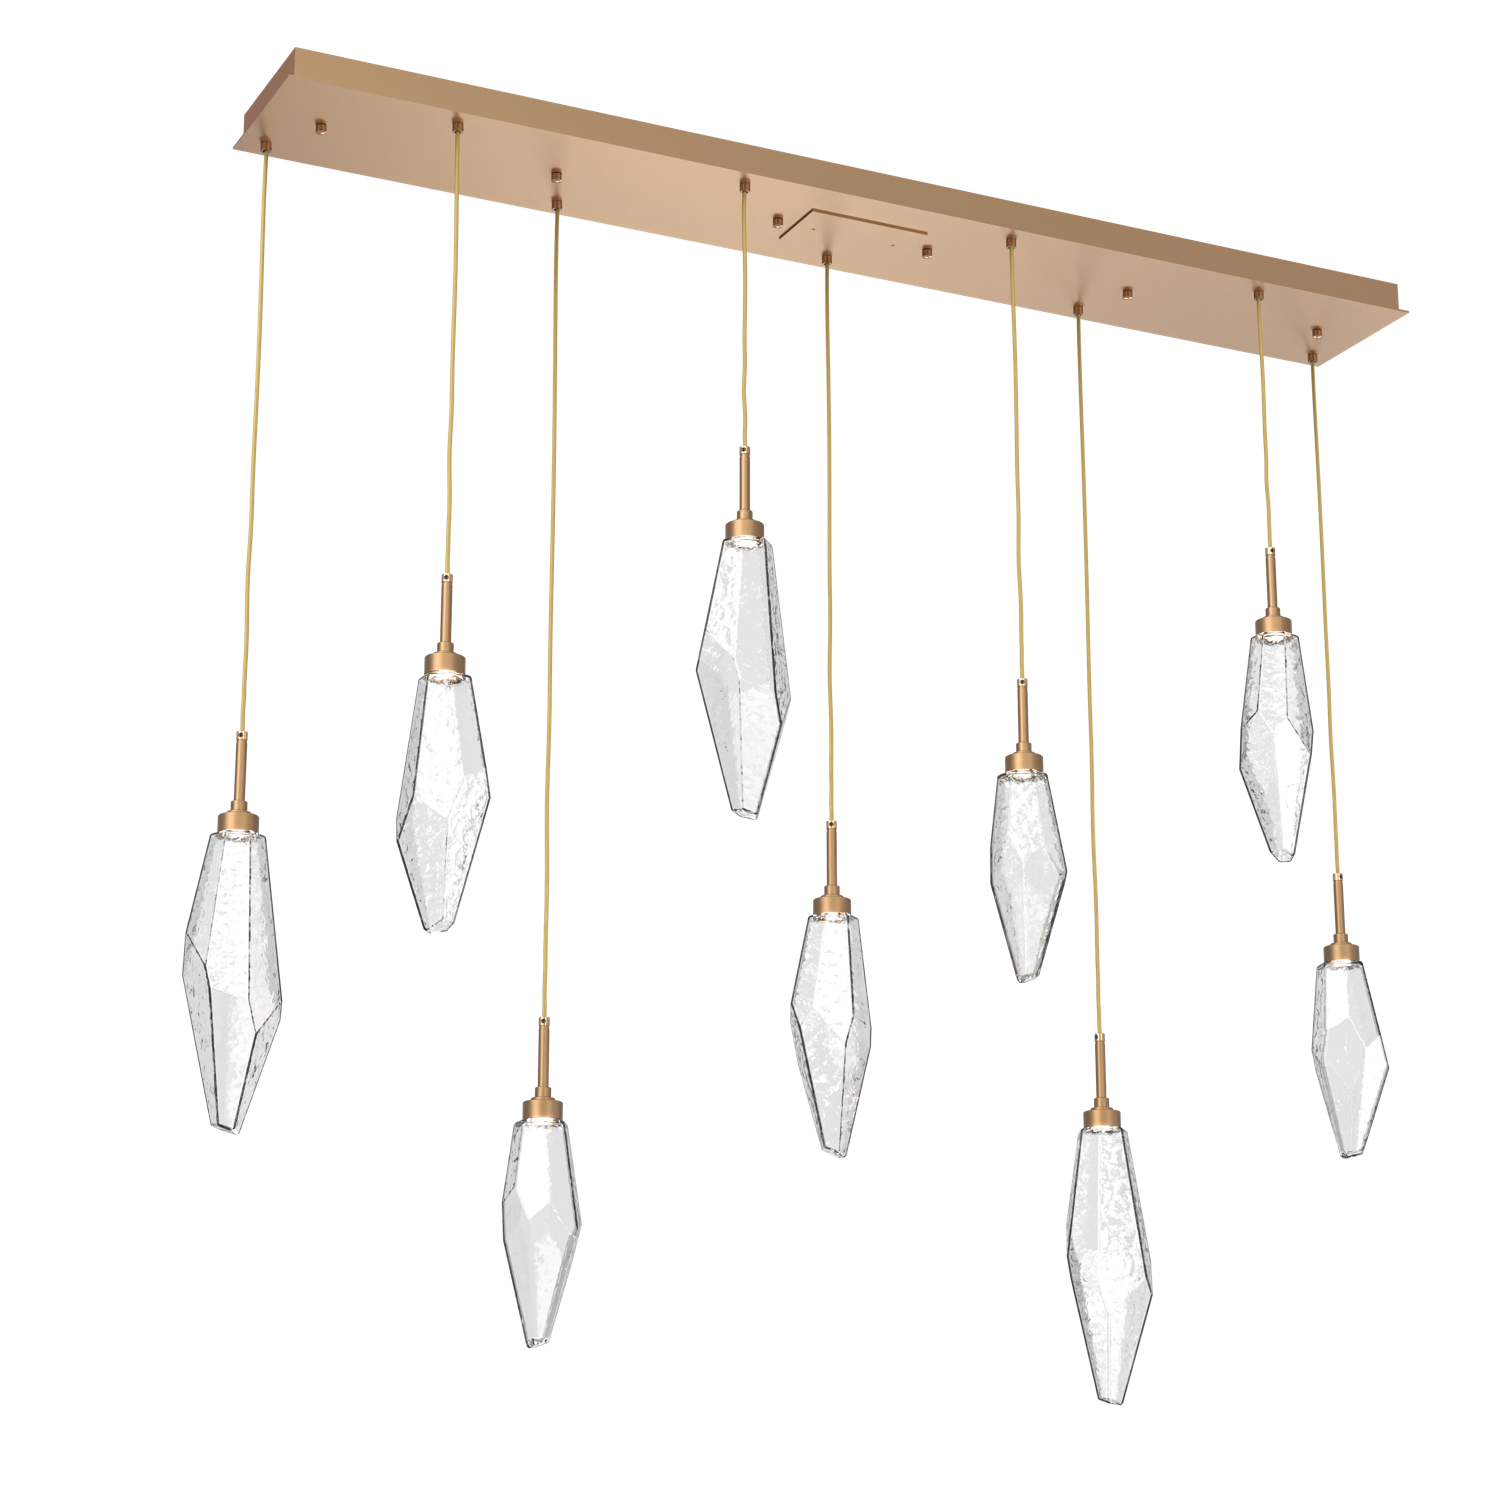 PLB0050-09-NB-CC-Hammerton-Studio-Rock-Crystal-9-light-linear-pendant-chandelier-with-novel-brass-finish-and-clear-glass-shades-and-LED-lamping